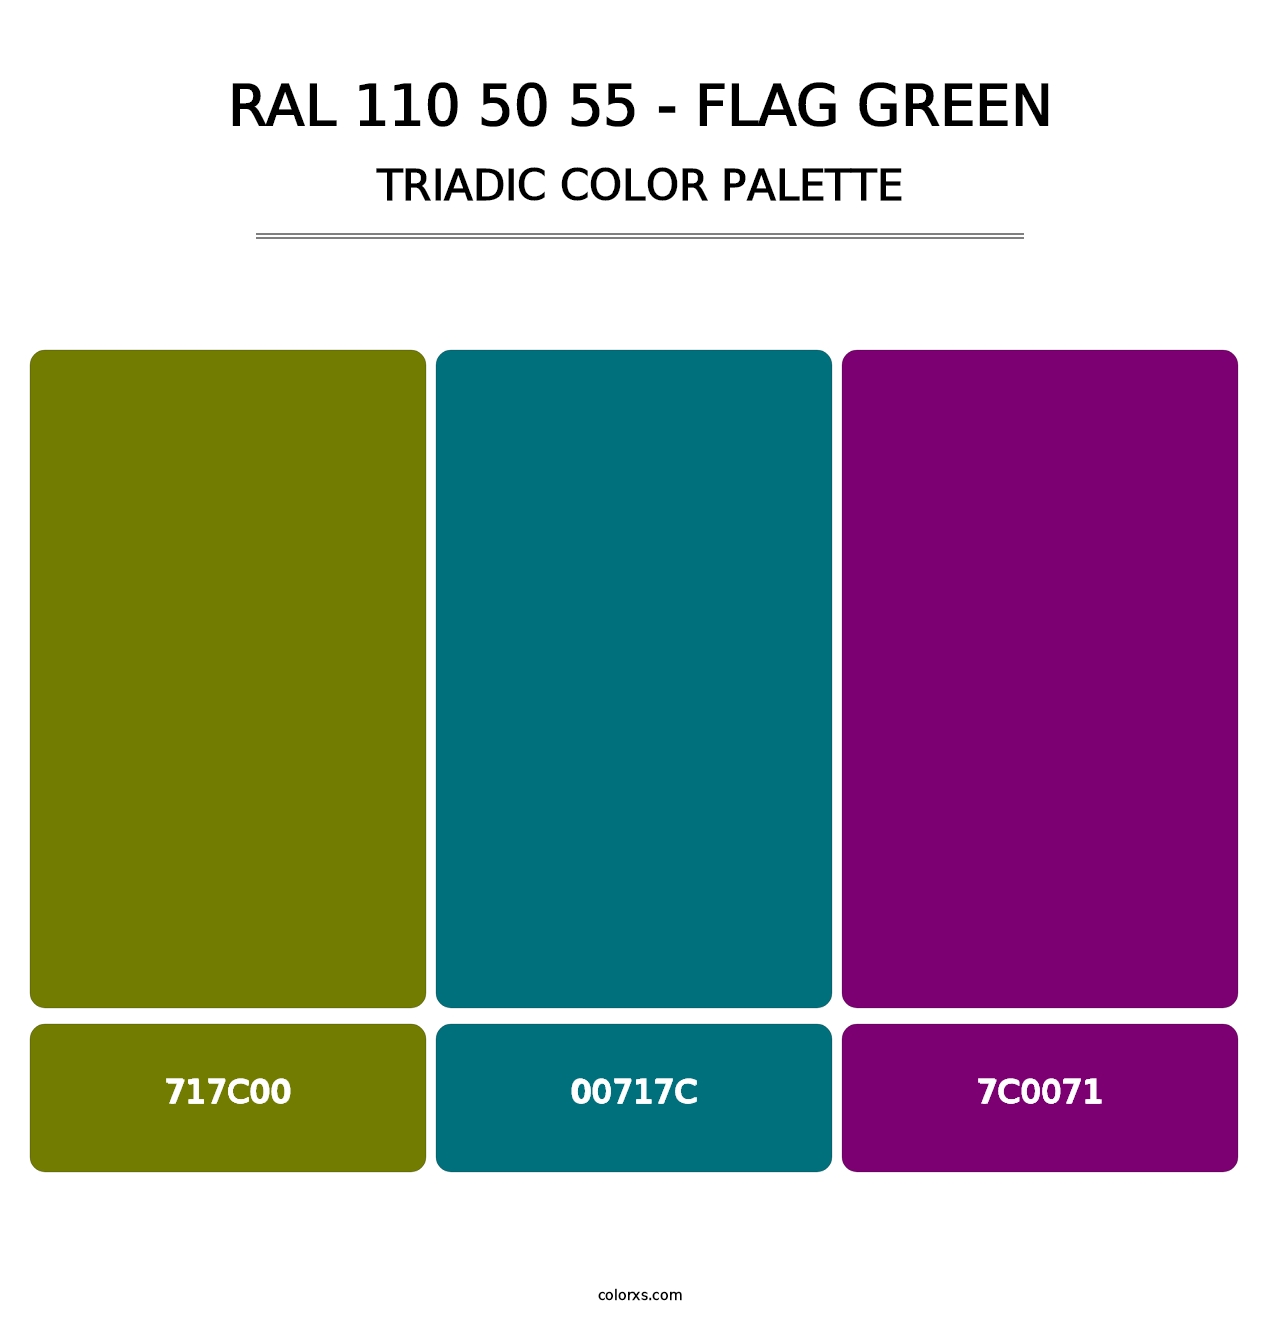 RAL 110 50 55 - Flag Green - Triadic Color Palette